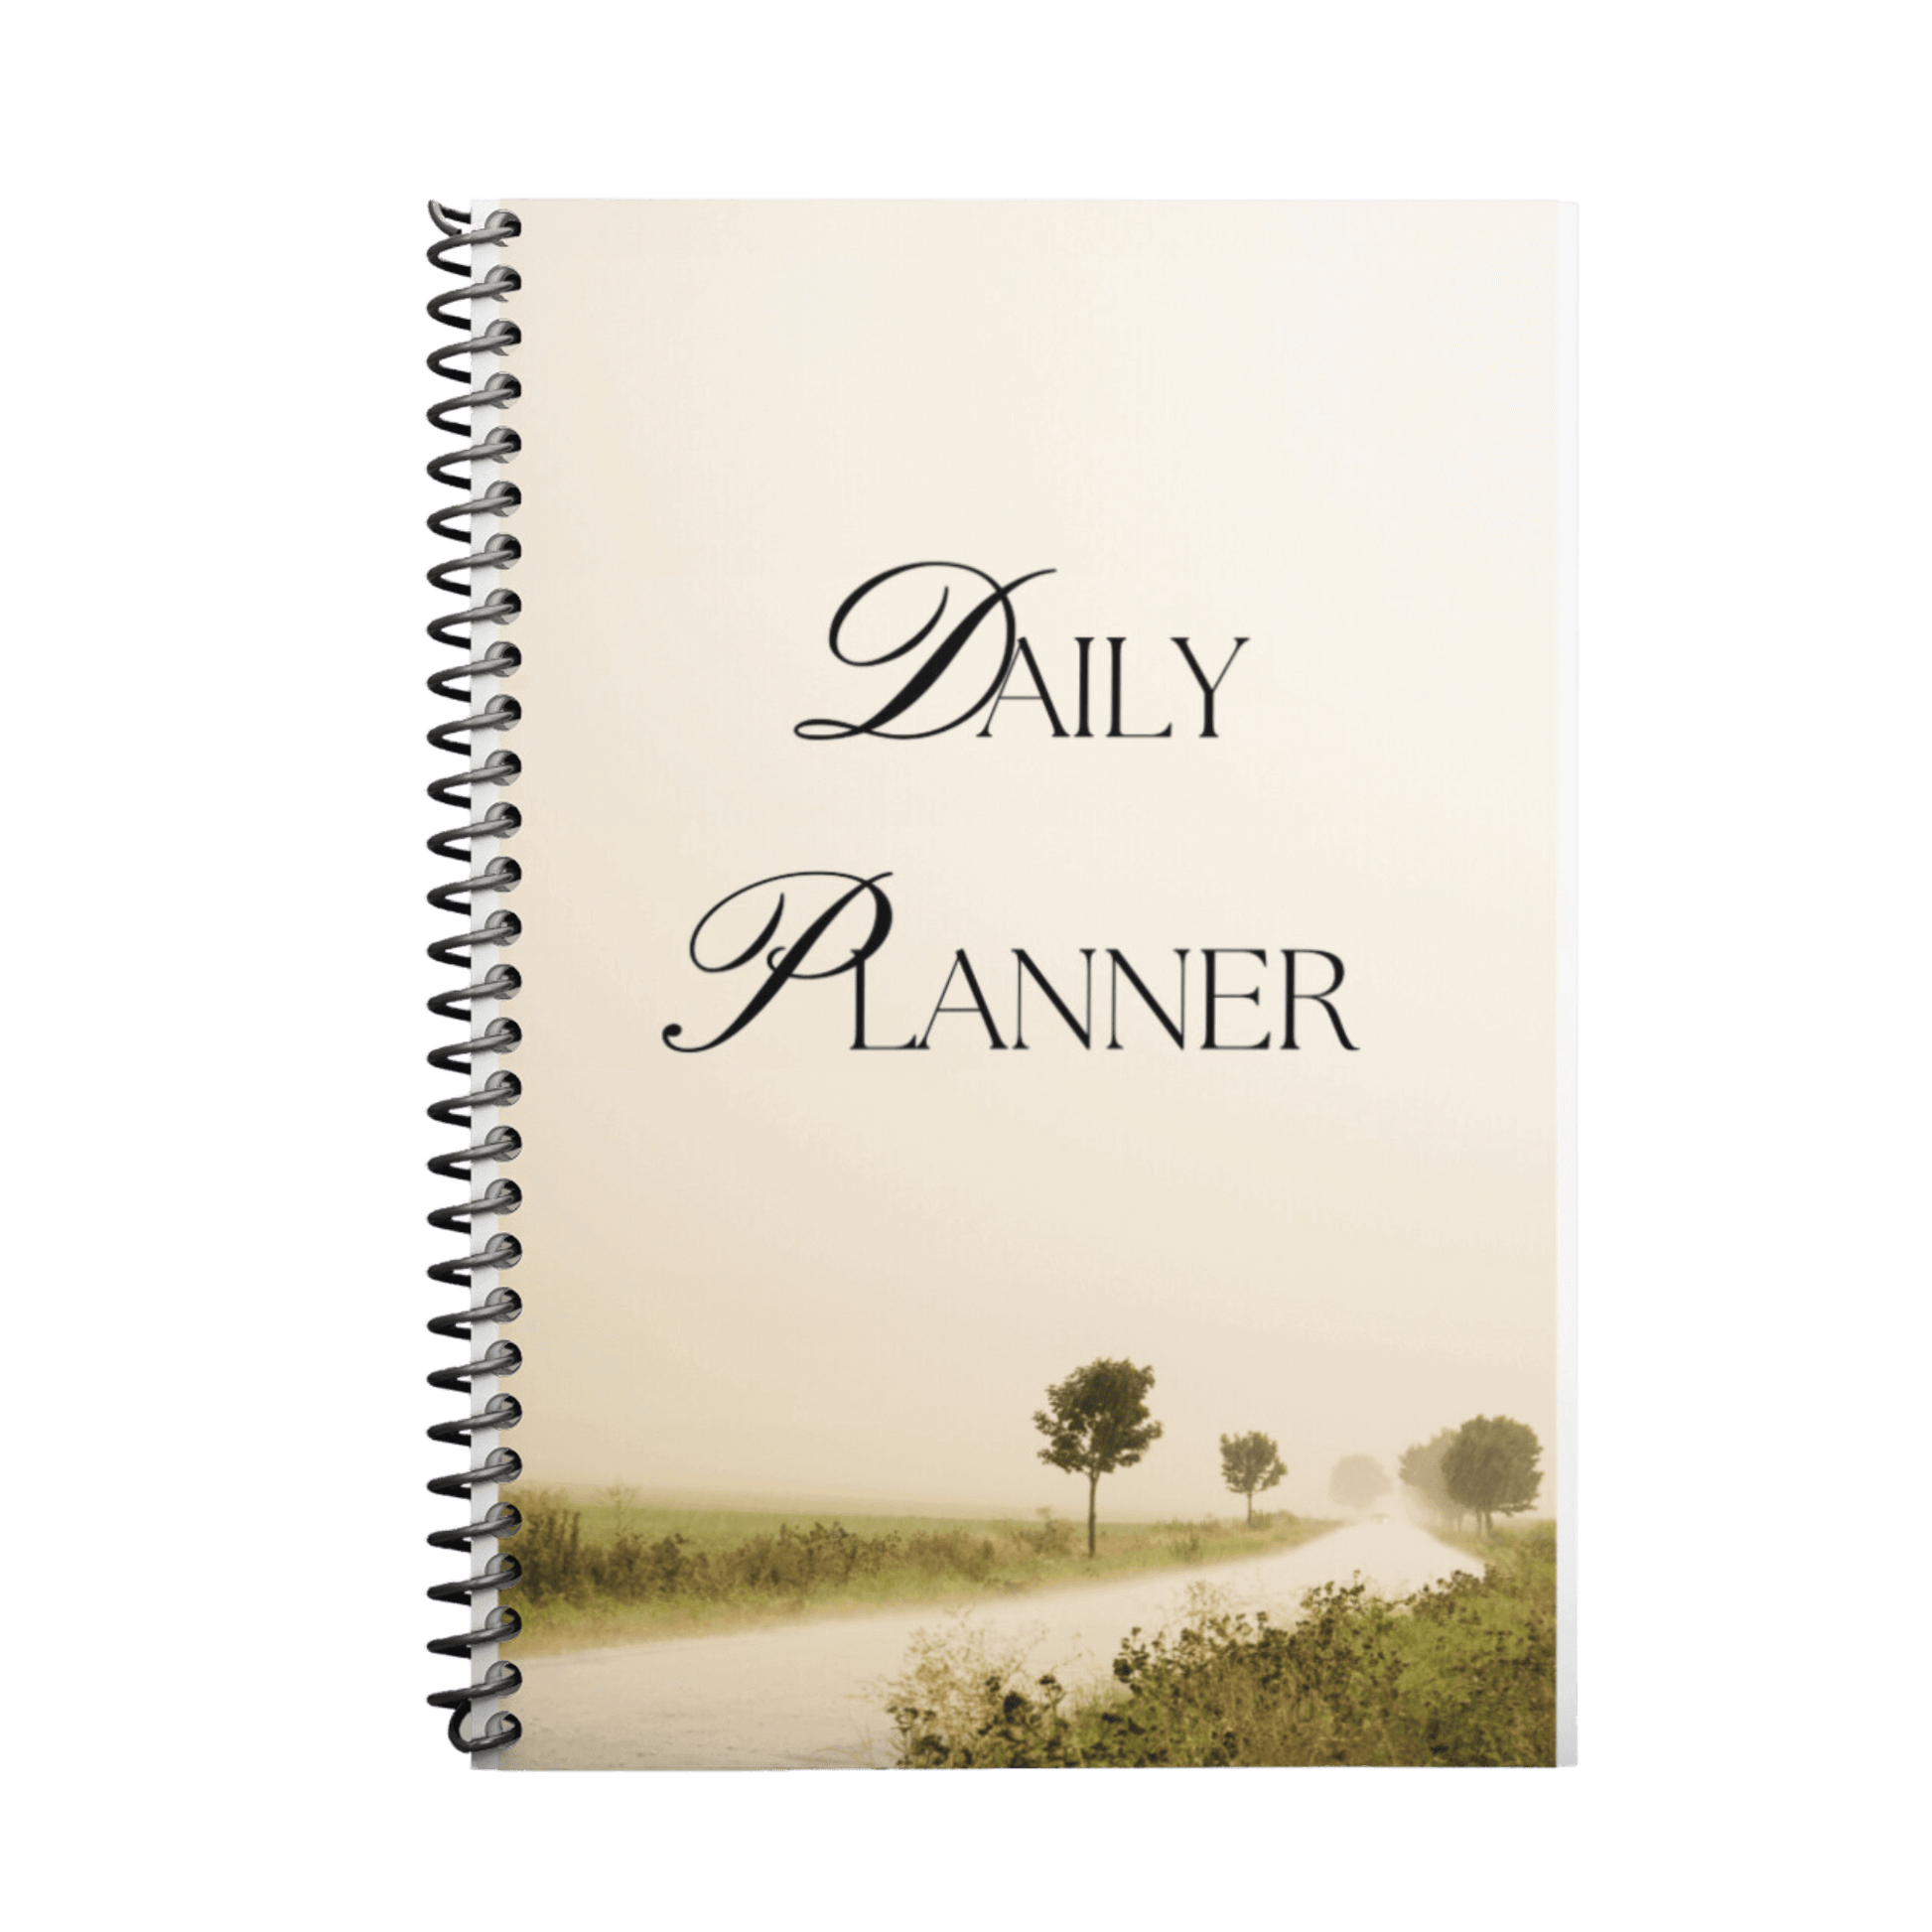 Image of Peaceful Beauty Daily Planner from Mindful Organizer selling for $28.00.